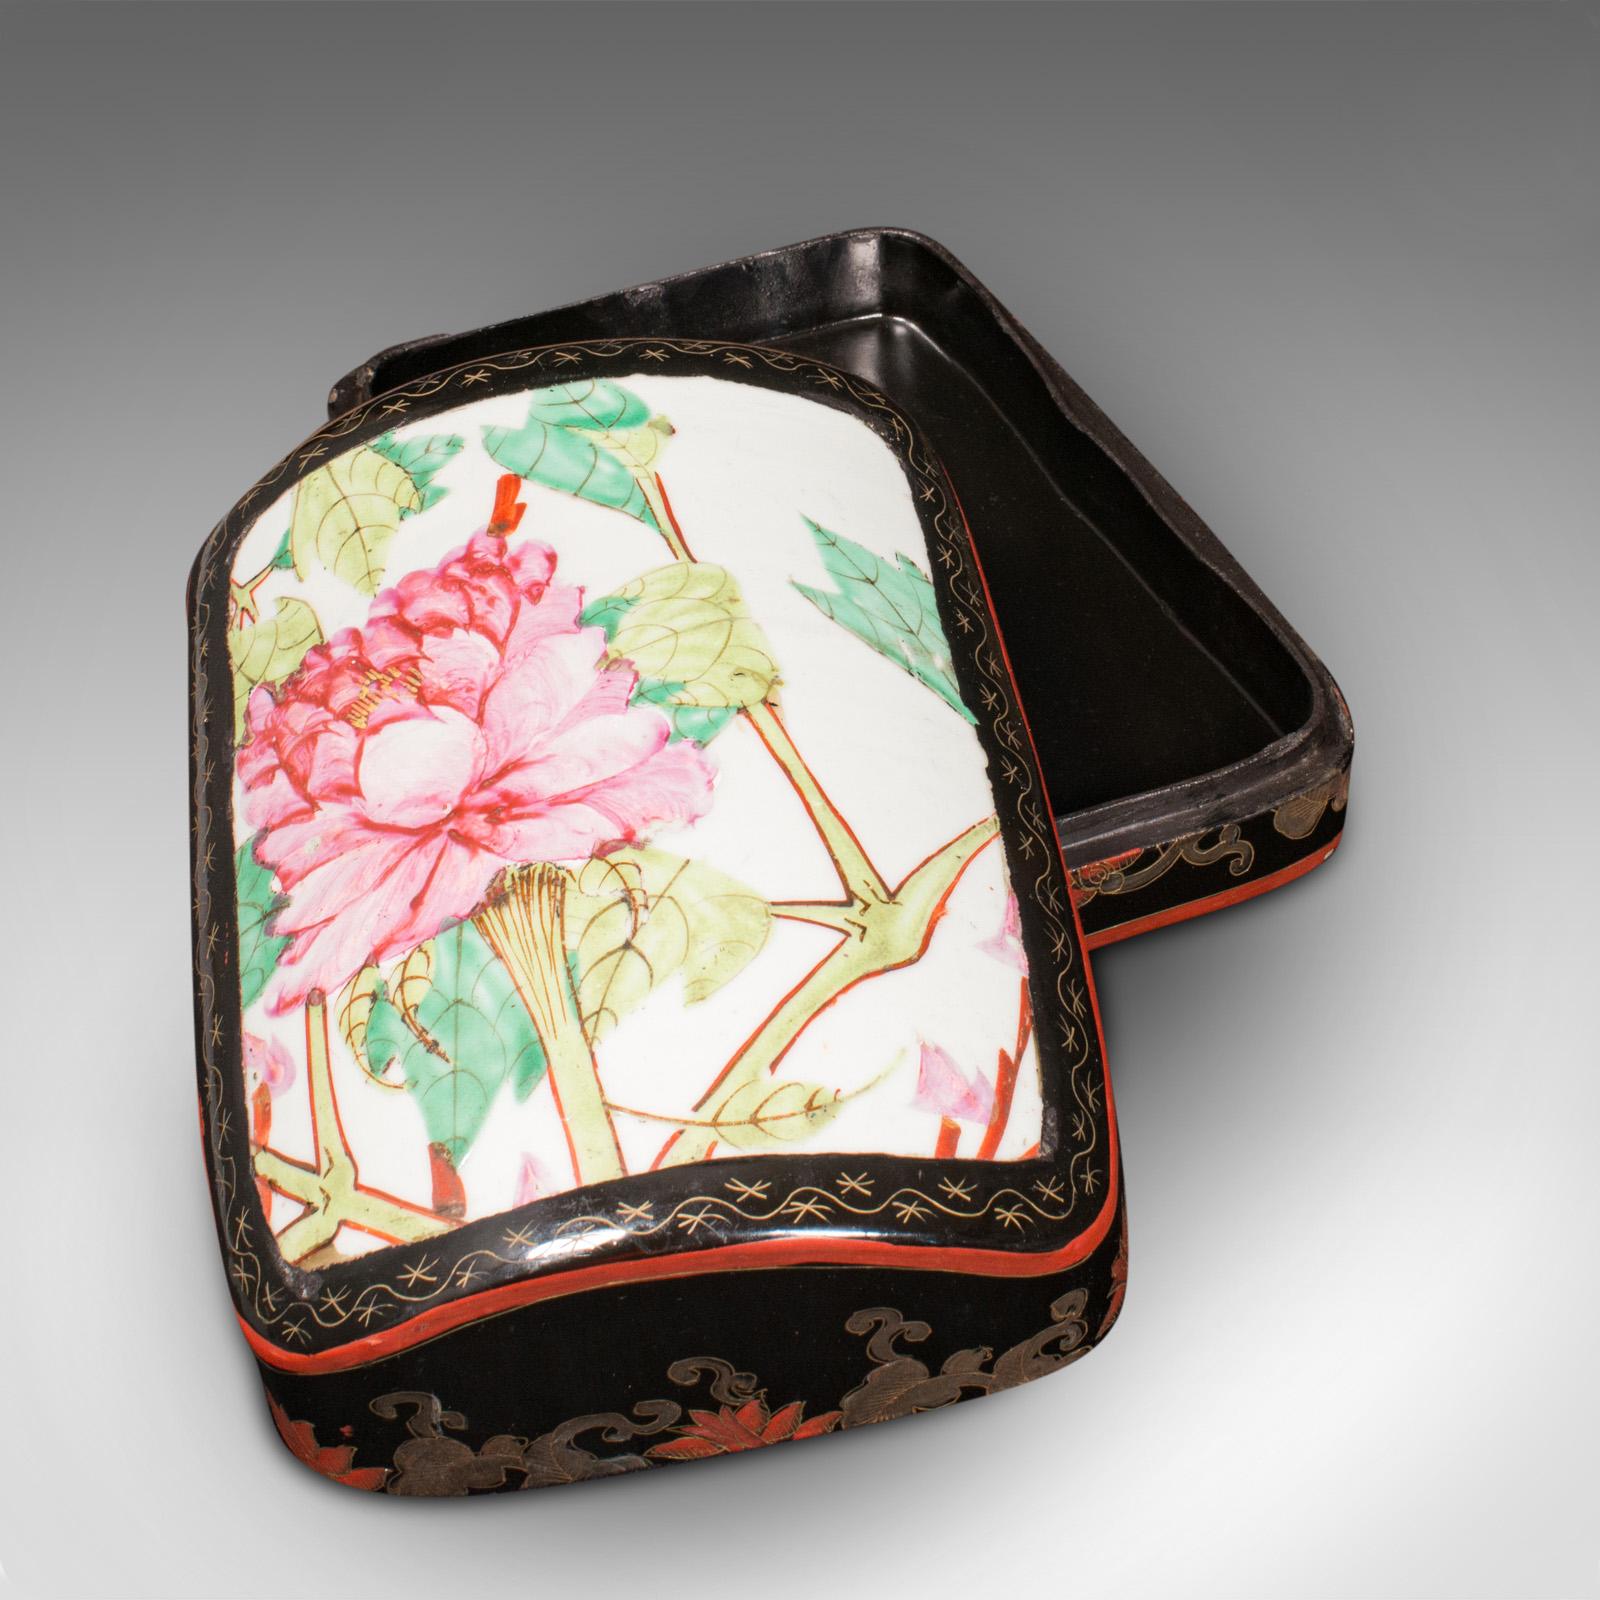 This is a vintage dome top box. An Oriental, japanned hardwood and enamel trinket or jewellery case, dating to the late Art Deco period, circa 1940.

Delightfully decorative small box with distinctive form and finish.
Displays a desirable aged